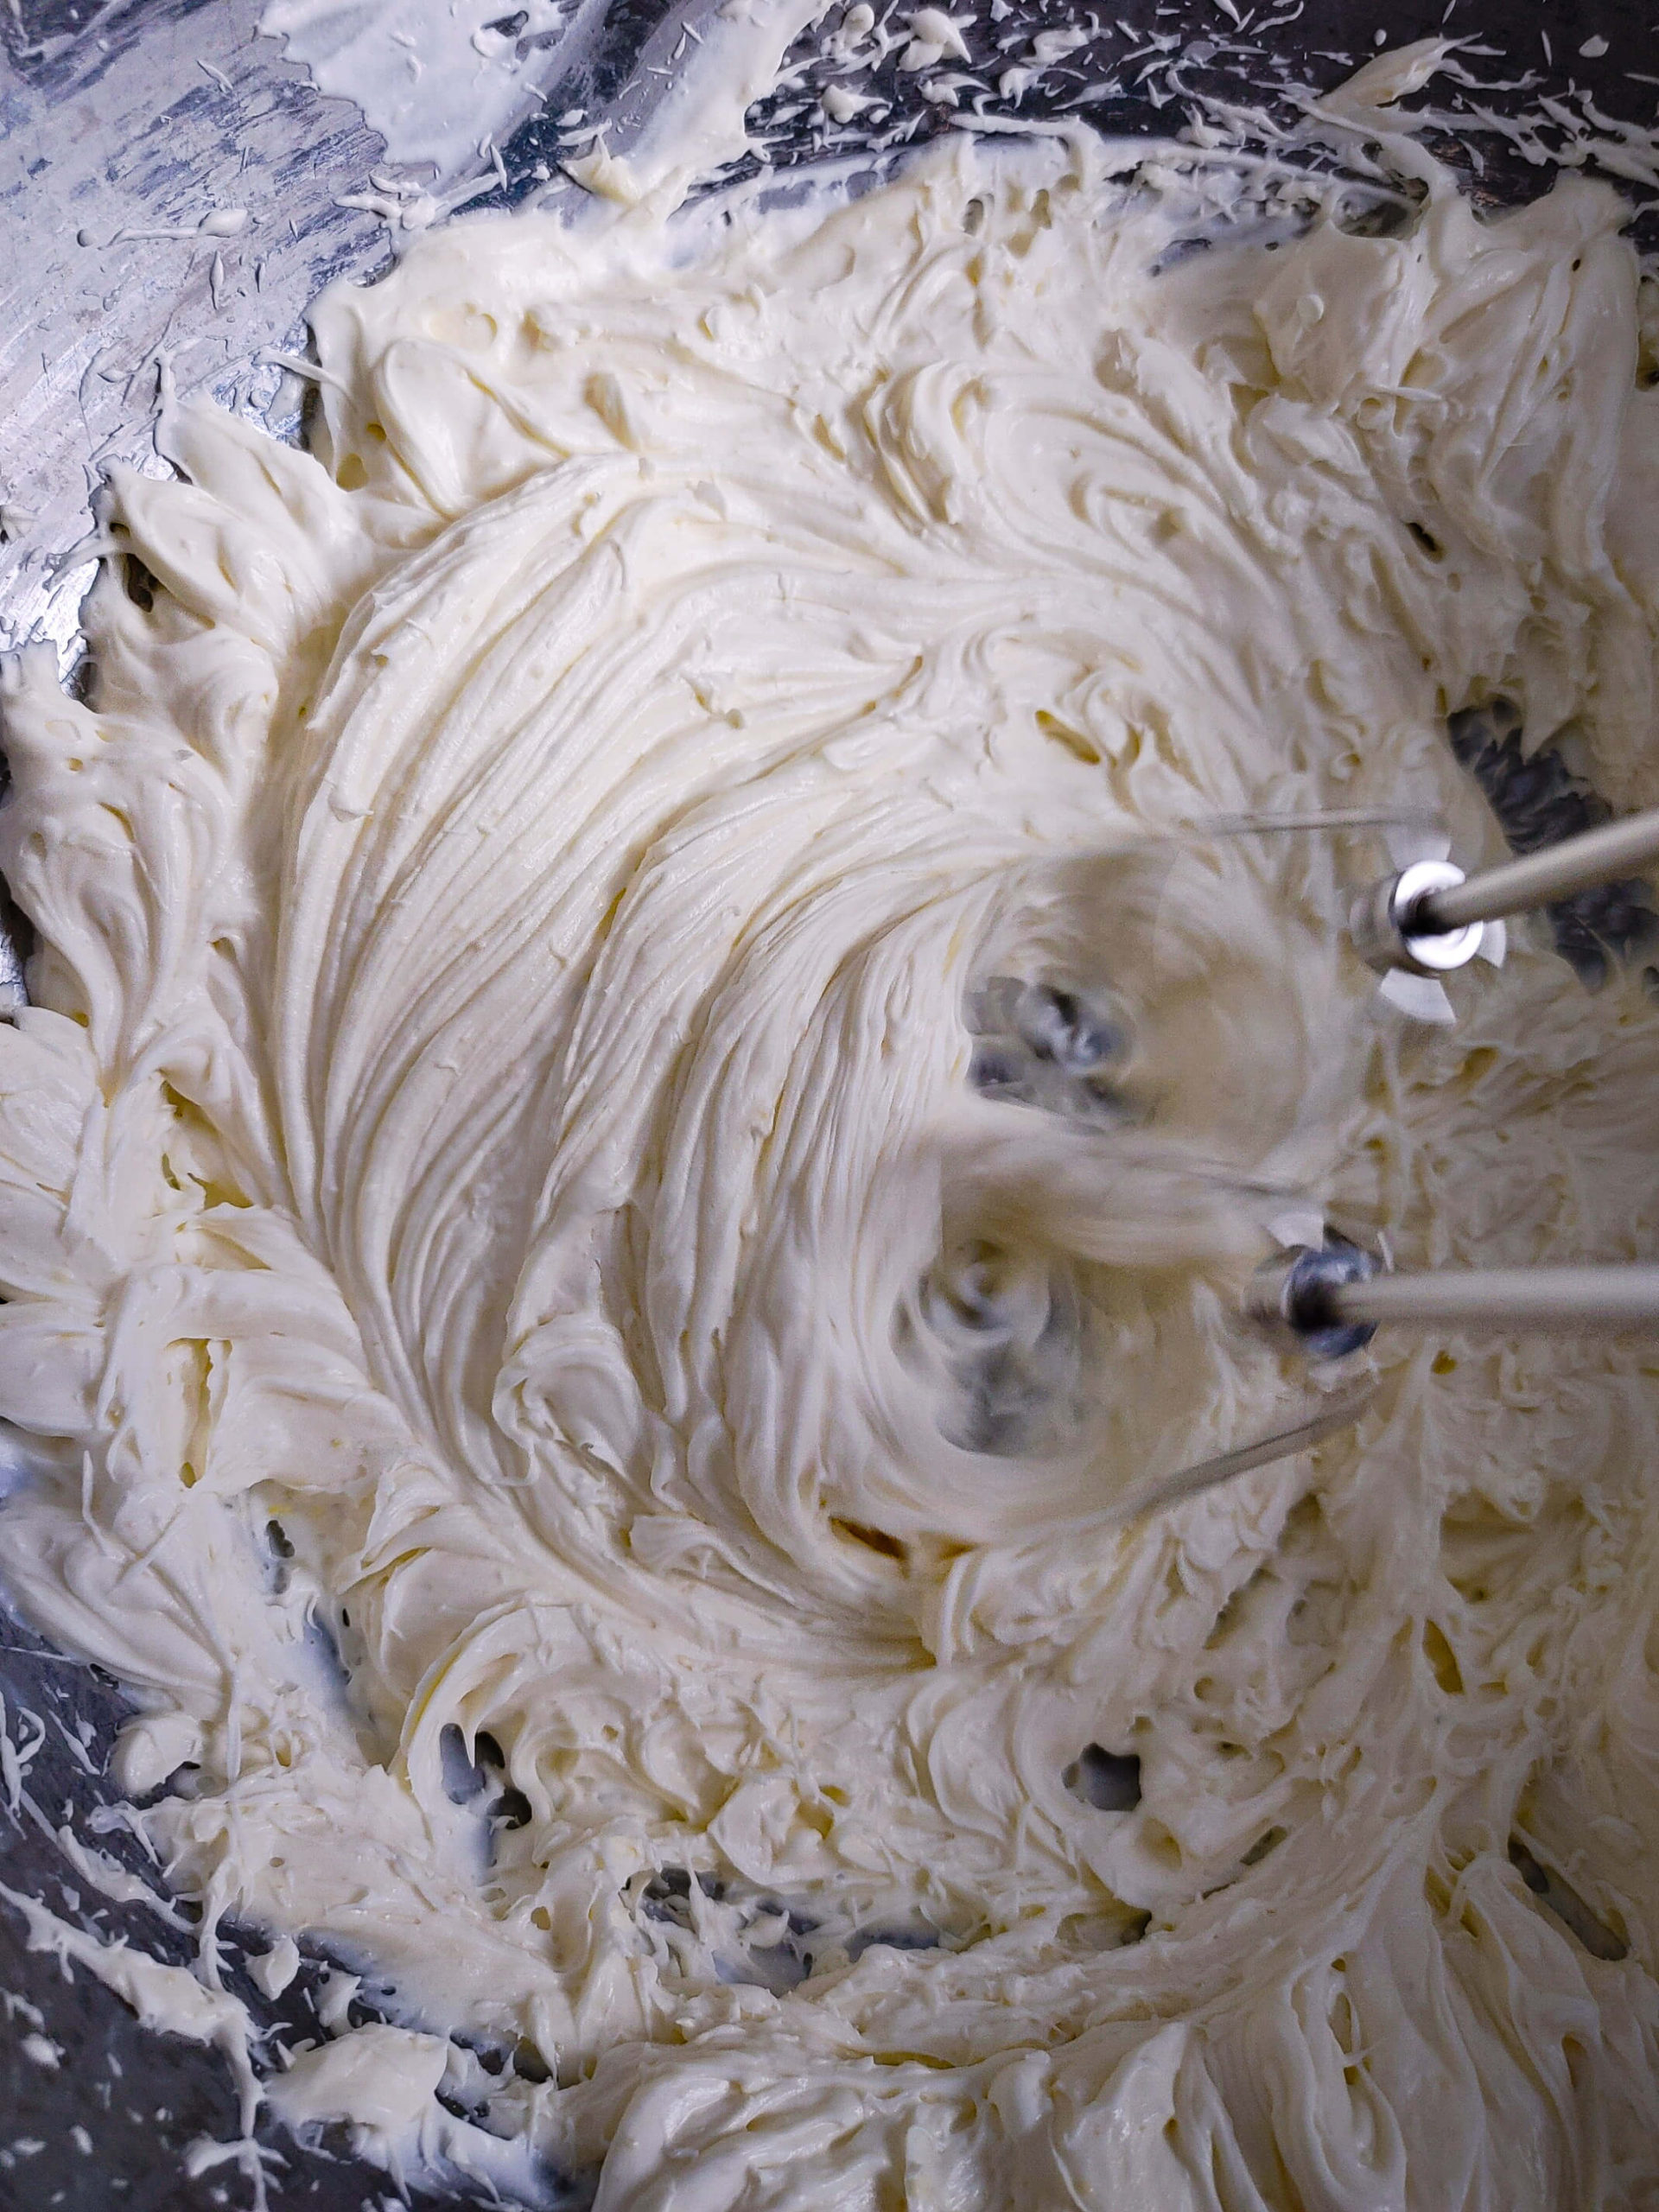 Combine the cream cheese mixture and the whip cream